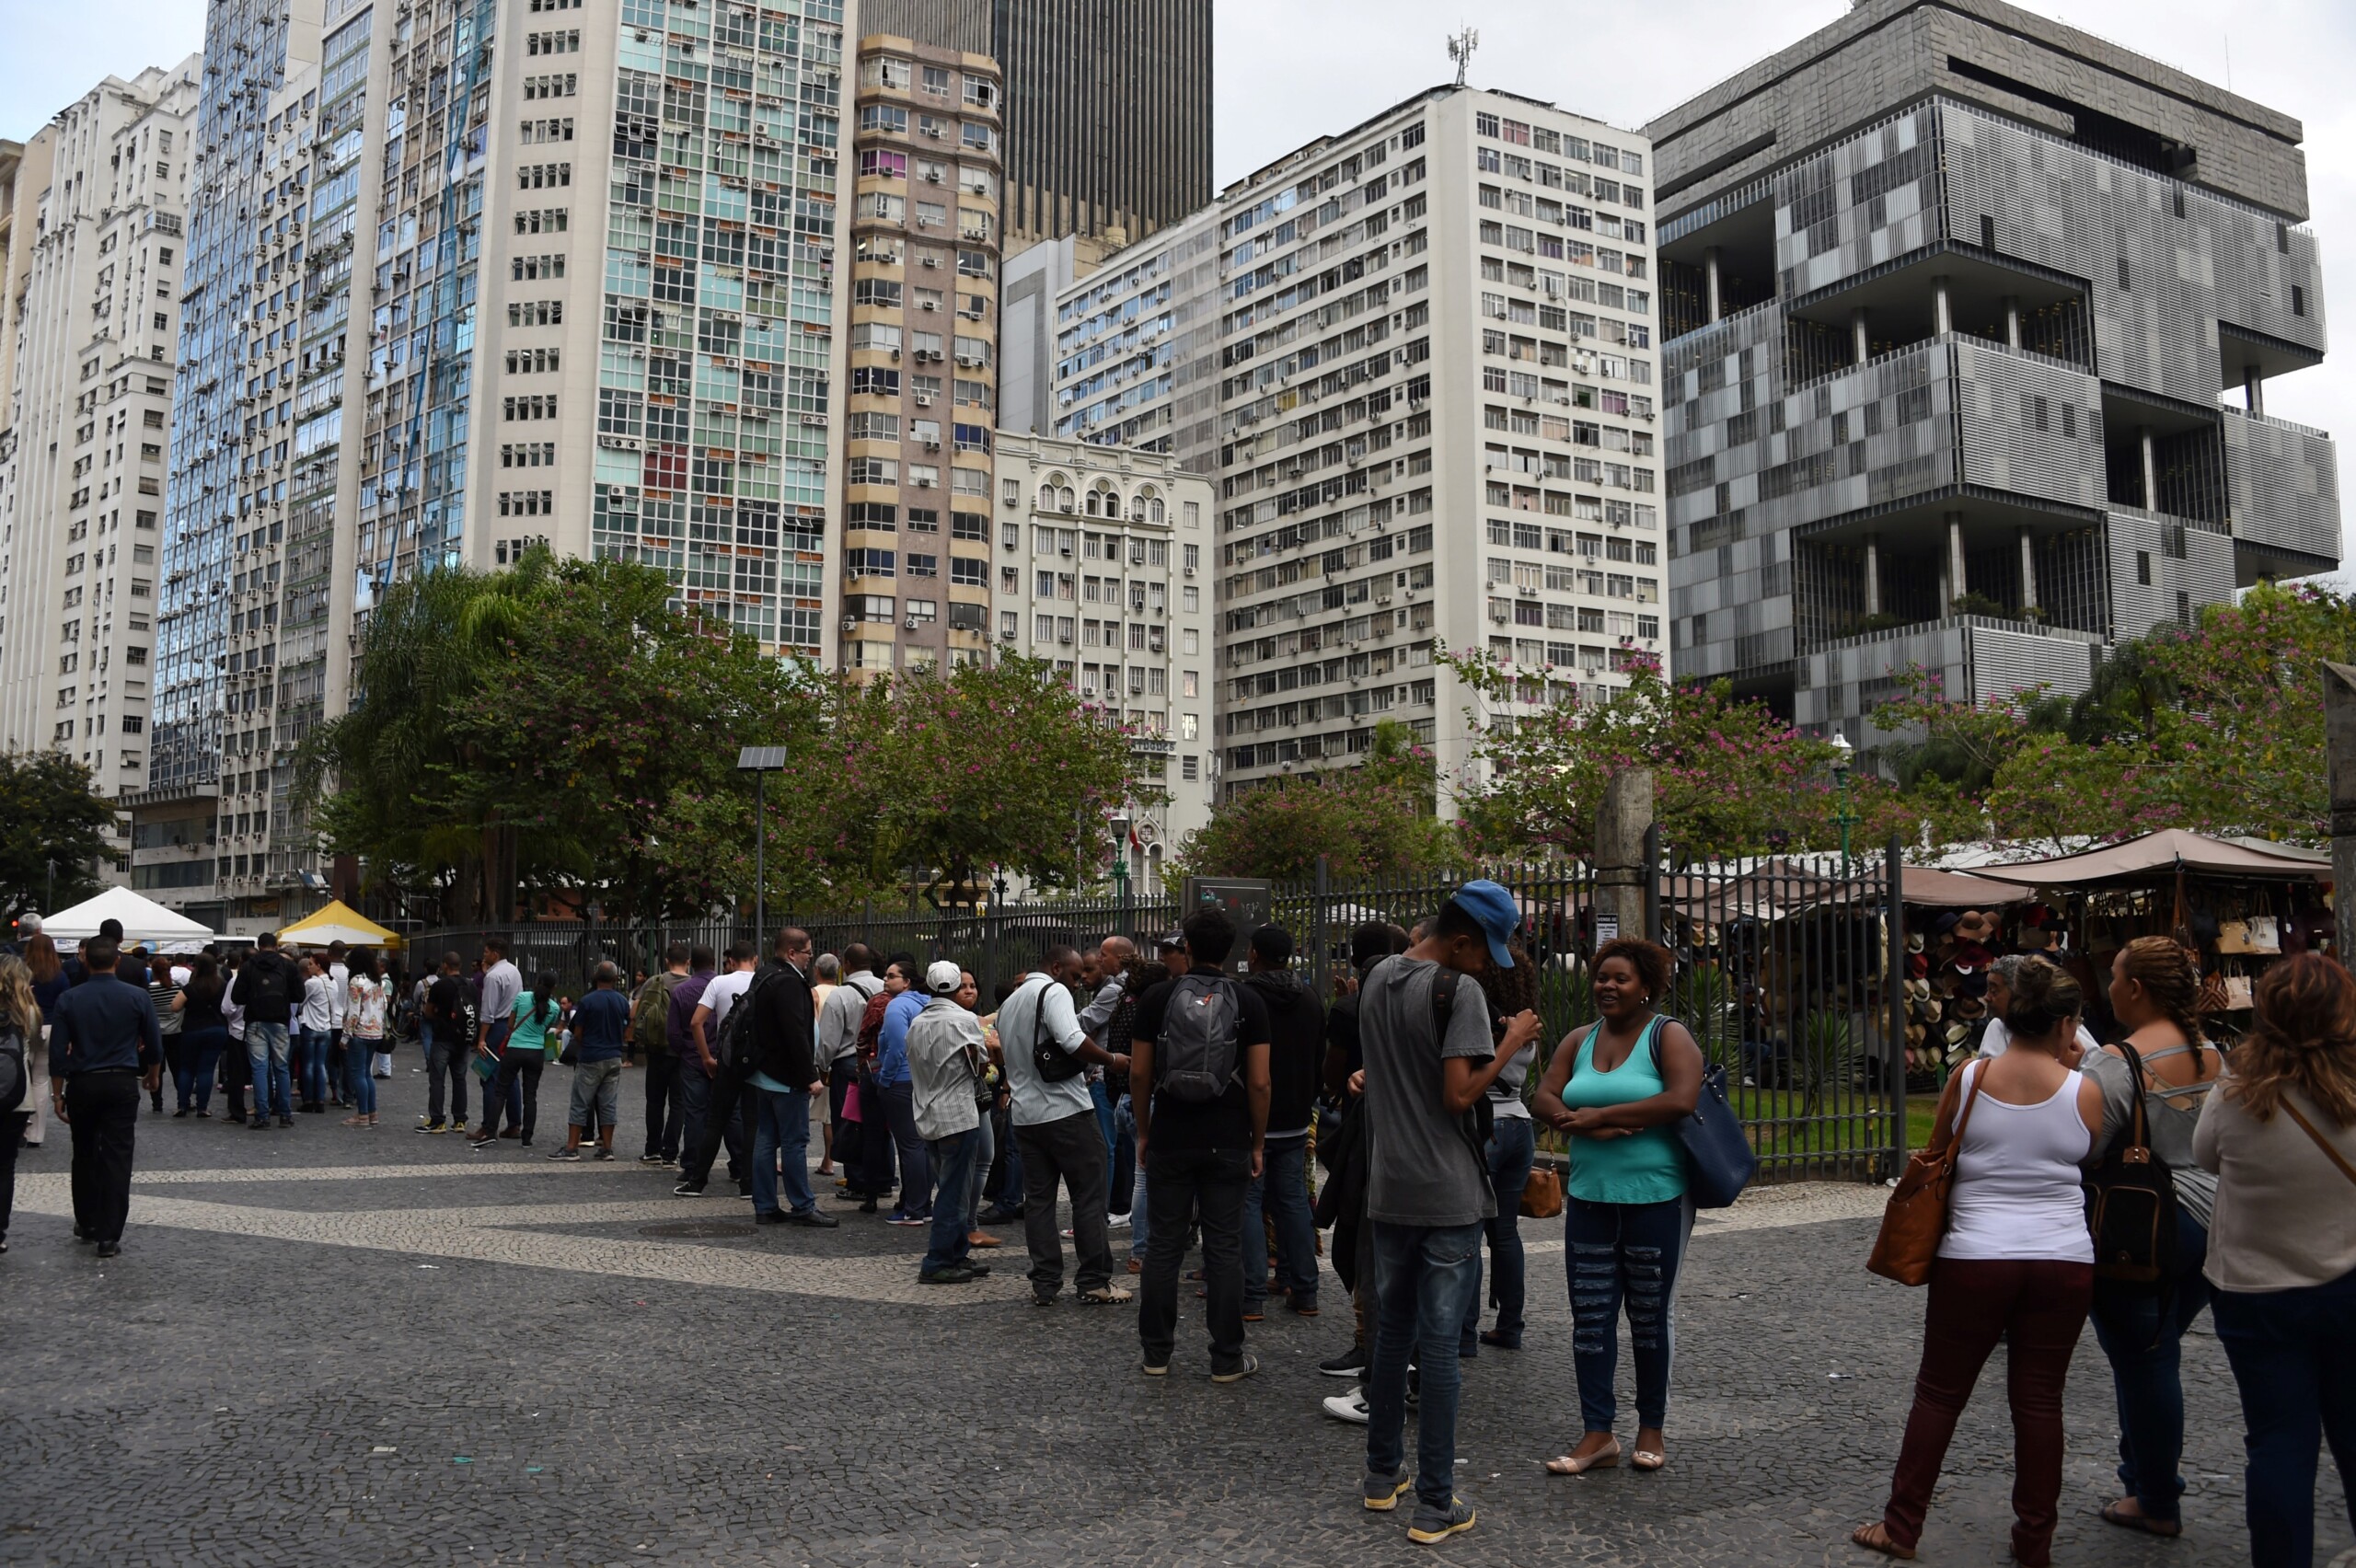 Unemployed people queue to registrate to search for jobs in downtown Rio de Janeiro, Brazil on May 25, 2016.<br /><br /><br /><br /><br /><br /><br /><br /><br /><br /><br /><br /><br /><br /><br /><br /><br /><br /><br />
According to the last survey, the unemployment rate has raised to 10.78%, the highest in the last years Brazil, as a strong economic crisis and corruption scandals hit the country. / AFP / VANDERLEI ALMEIDA        (Photo credit should read VANDERLEI ALMEIDA/AFP/Getty Images)